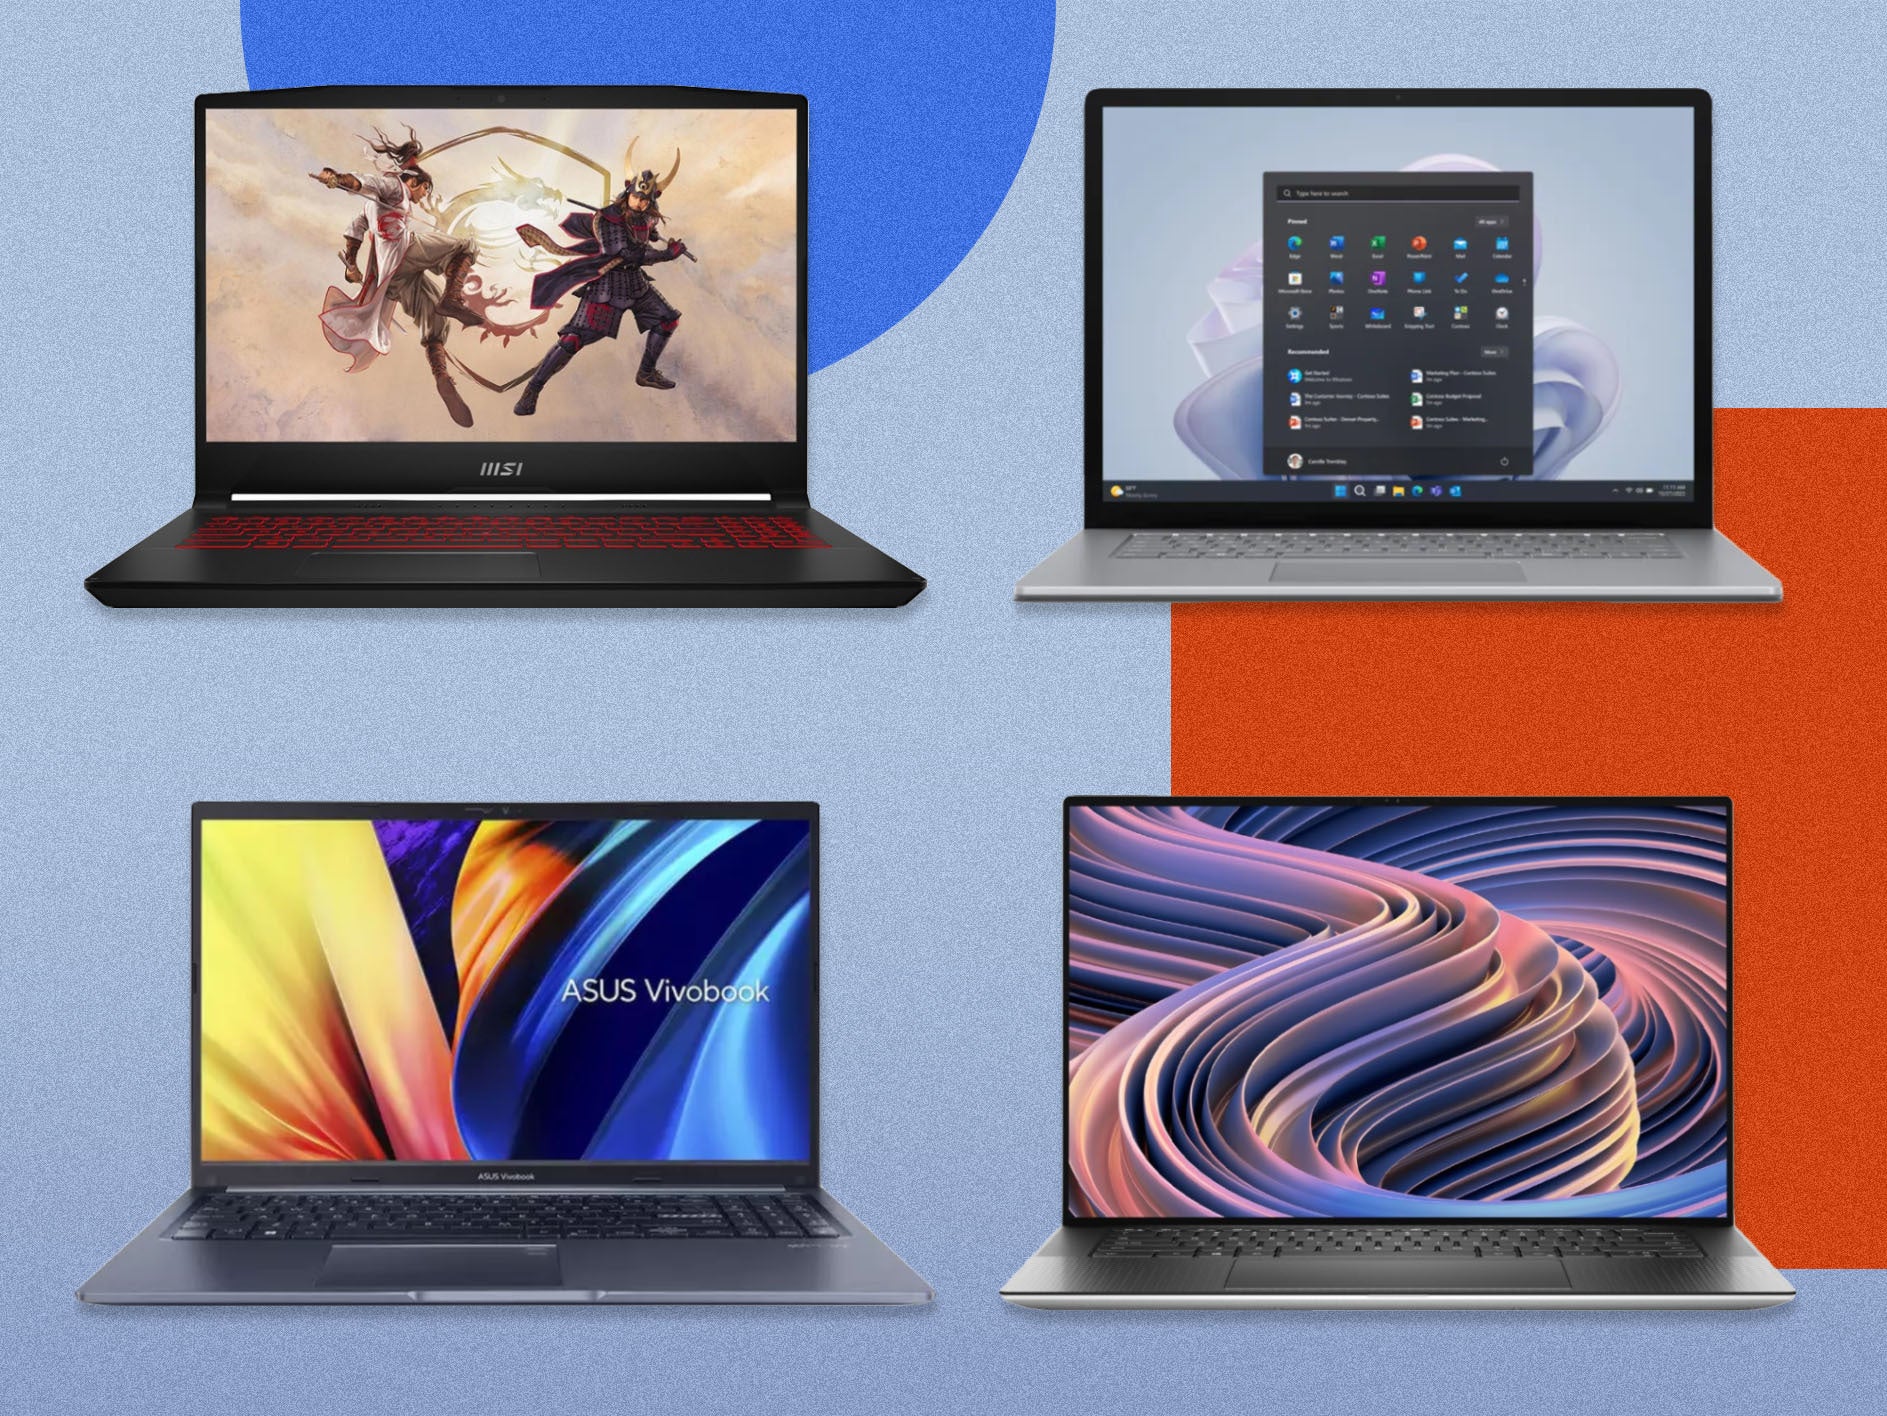 Black Friday laptop deals 2022: When do they start and what discounts can we expect?